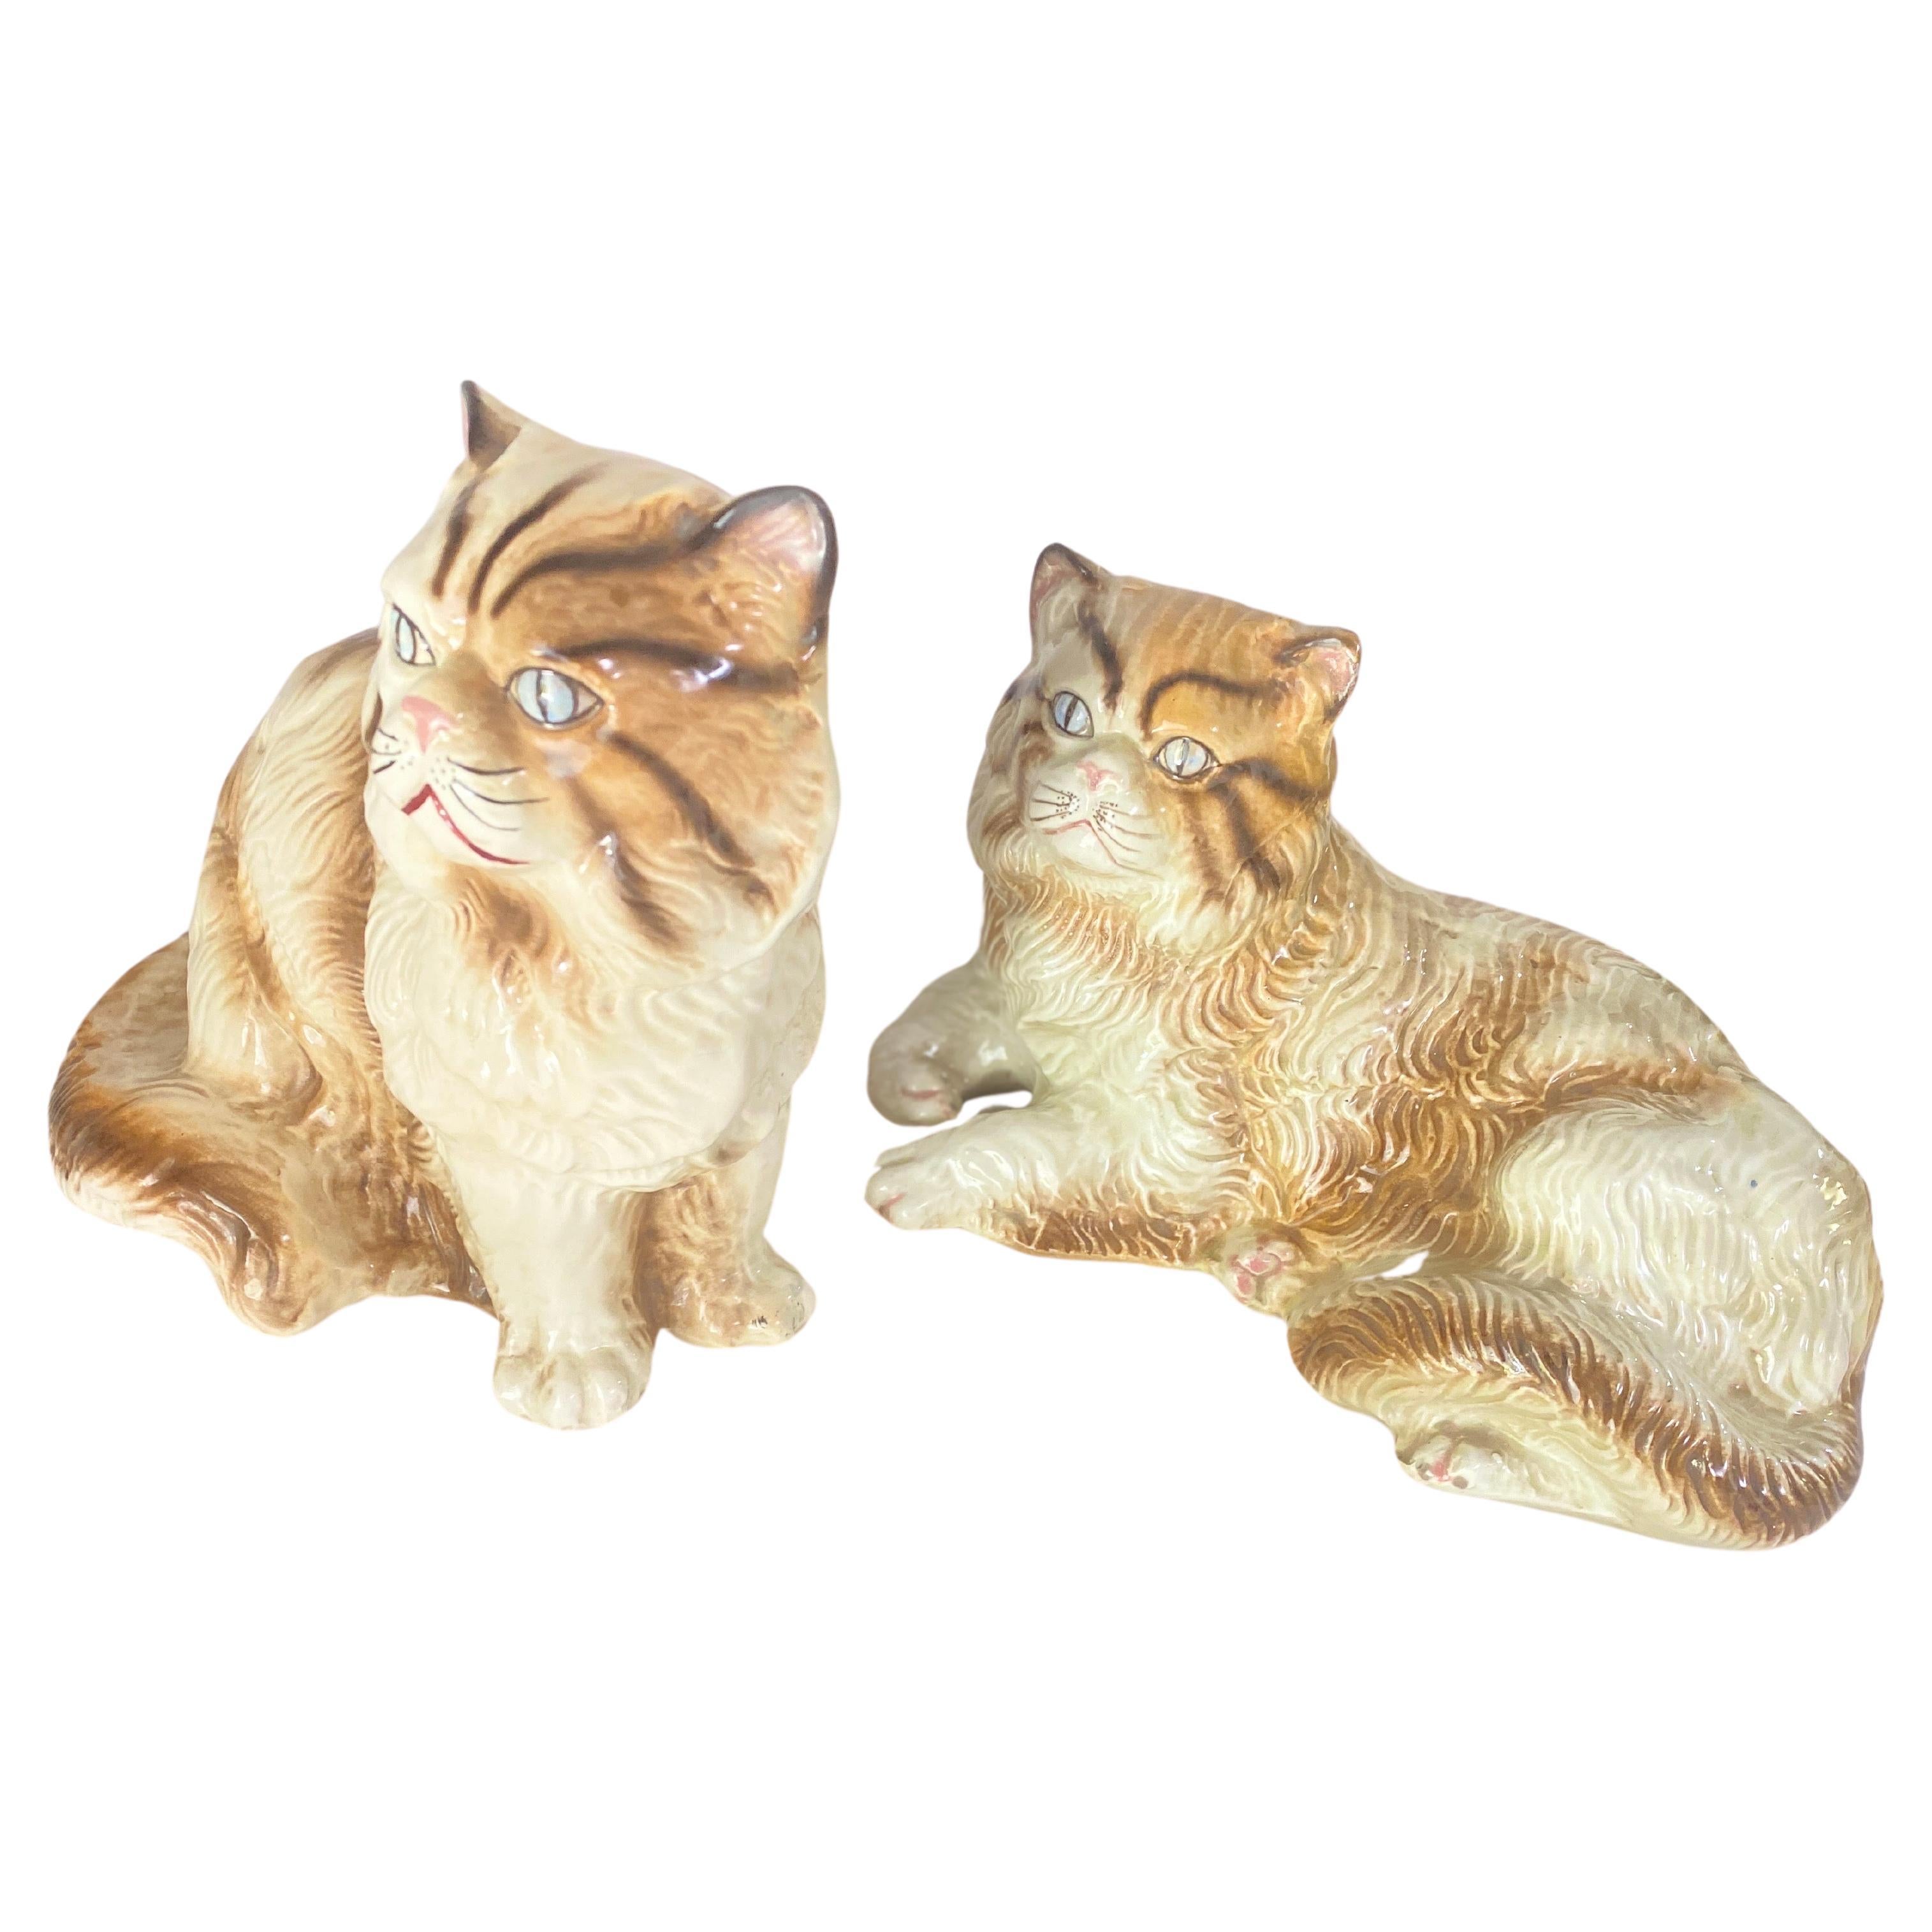 Sculptures of Larges Cats Italian Ceramic  from the 1970s Set of 2 For Sale